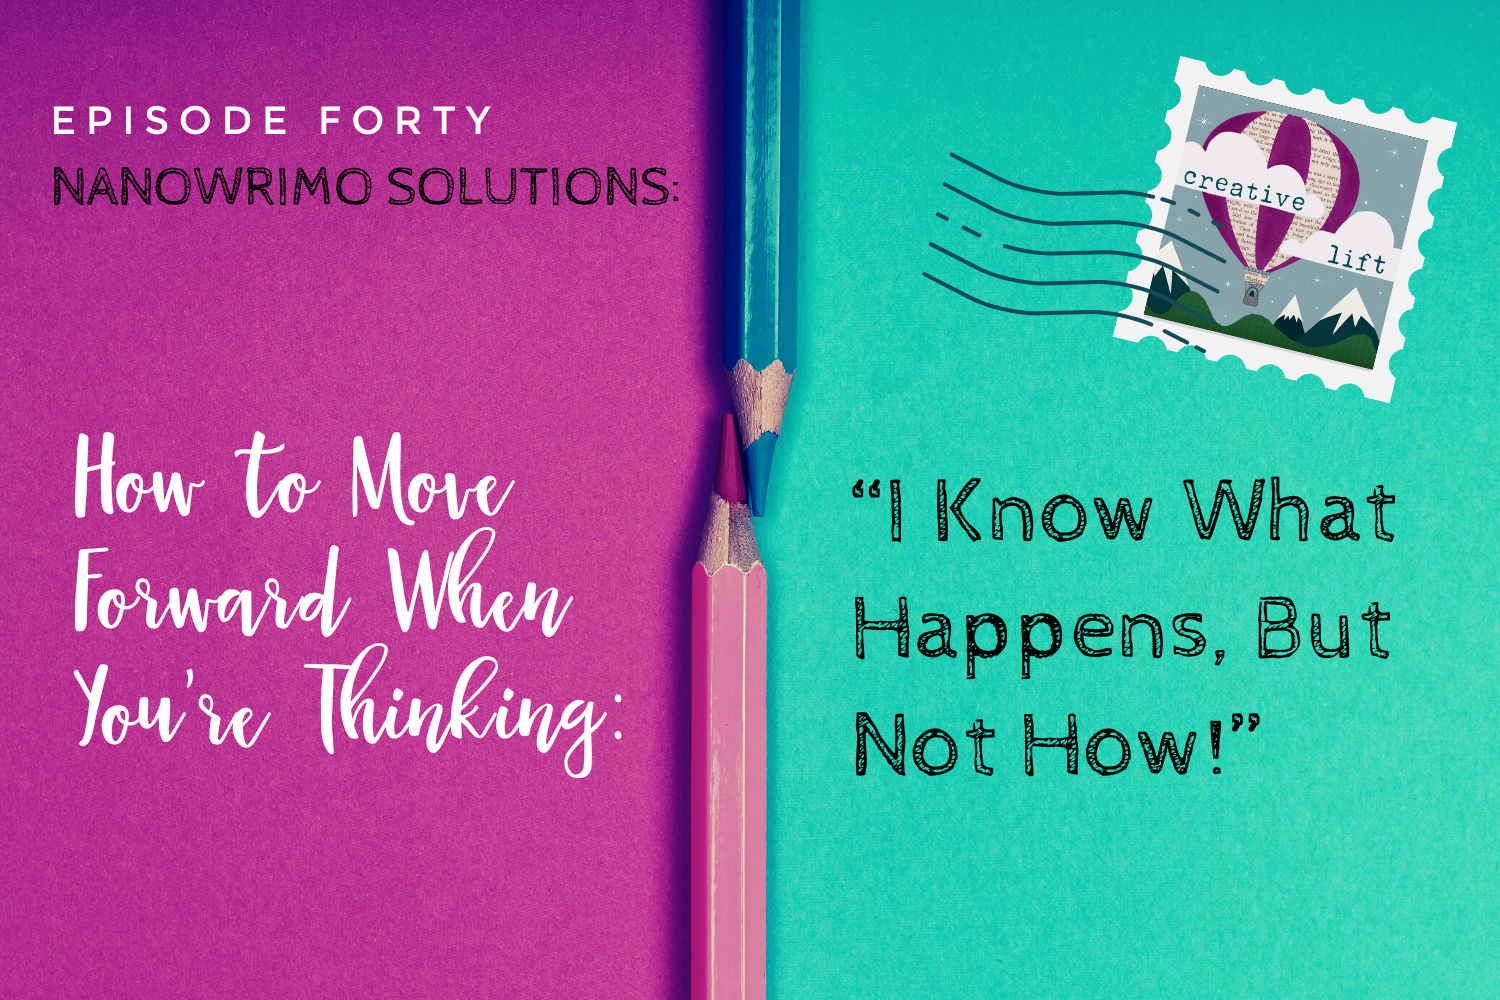 Creative Lift-Episode 40: NaNoWriMo SOlutions: How to Move Forward When You're Thinking "I KNow What Happens, But Not How!"